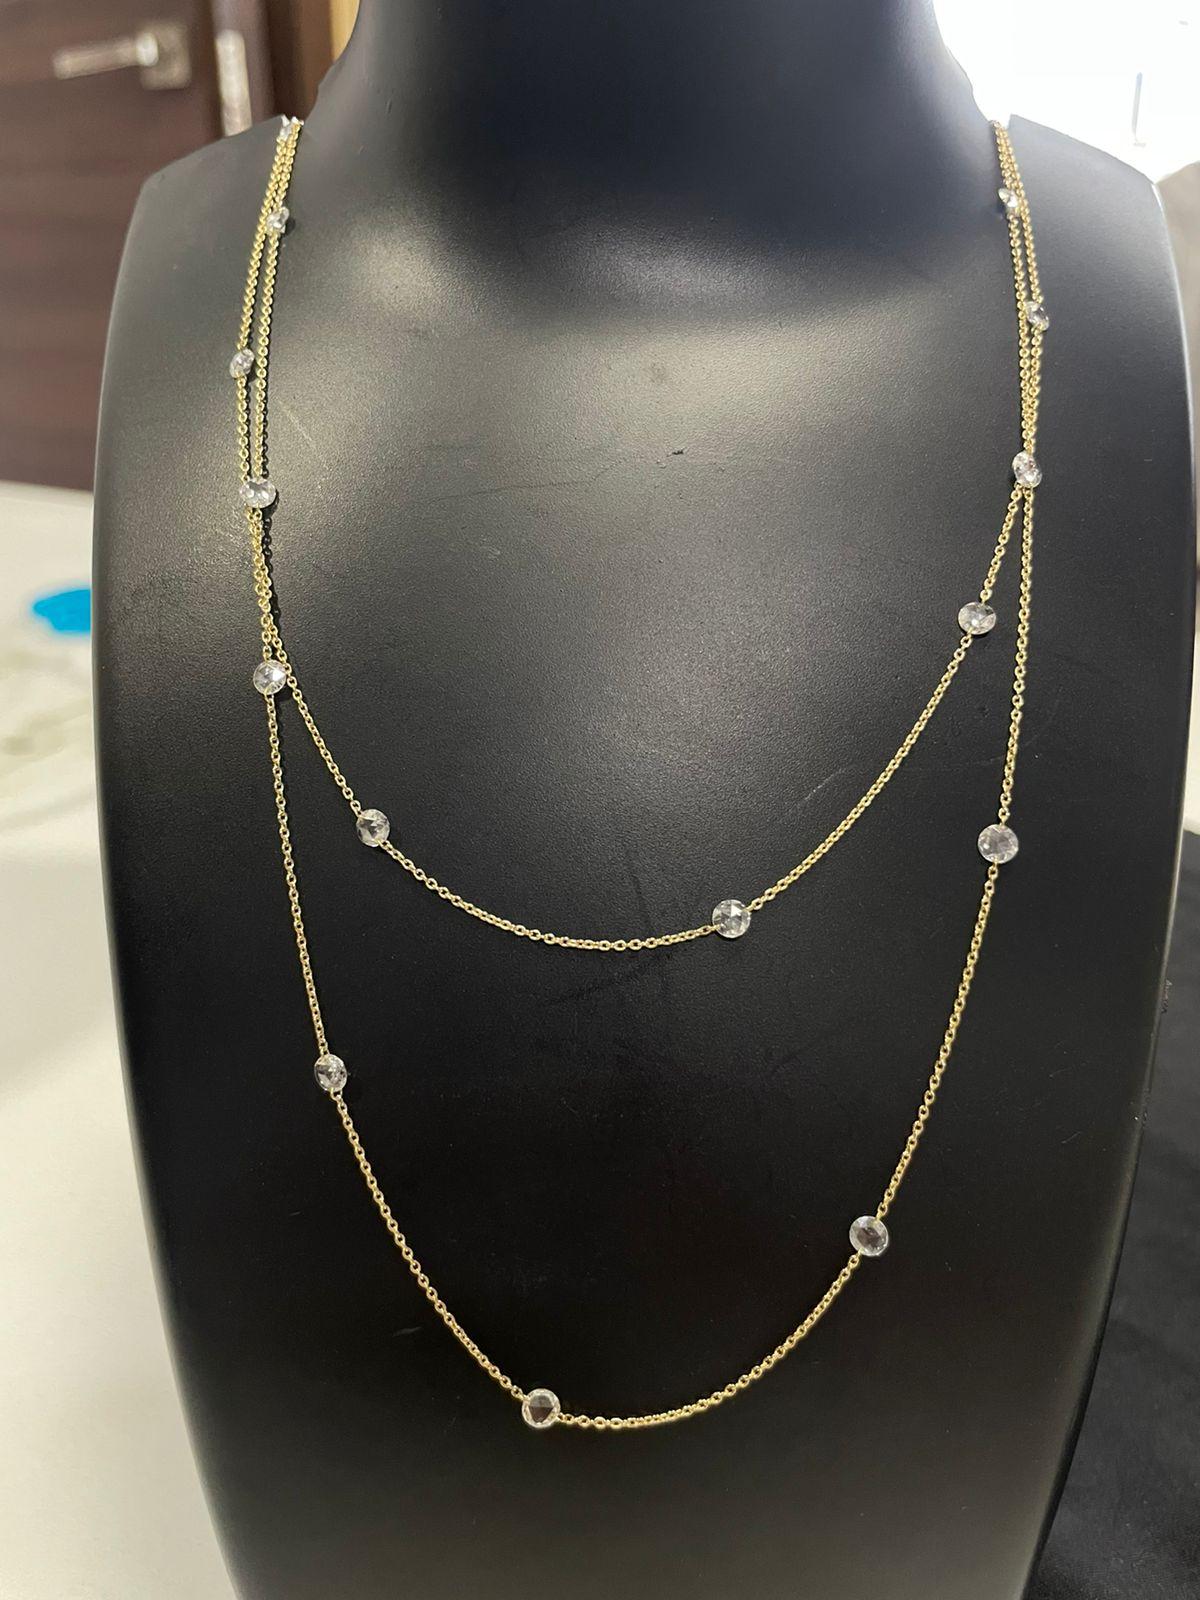 PANIM 18K Yellow Gold 2 Carat Diamond Rosecut Station Necklace In New Condition For Sale In Tsim Sha Tsui, Hong Kong